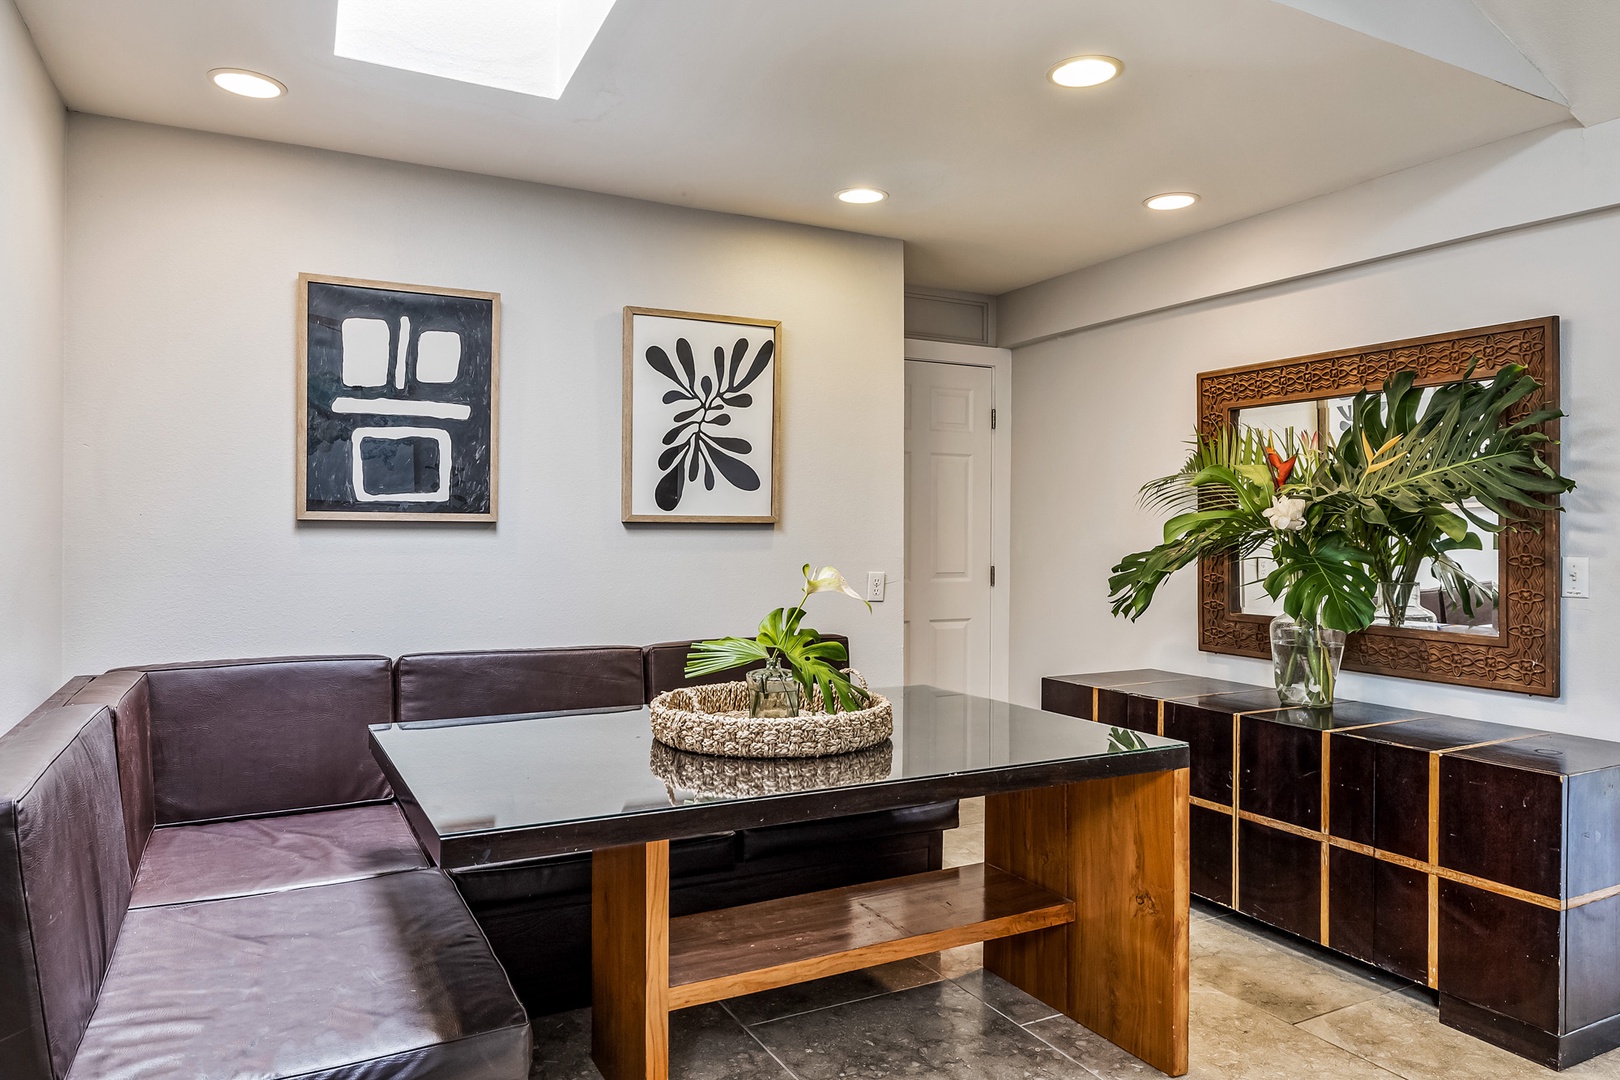 Honolulu Vacation Rentals, Hale Ho'omaha - Gather here for a quick snack, morning coffee, or a game night